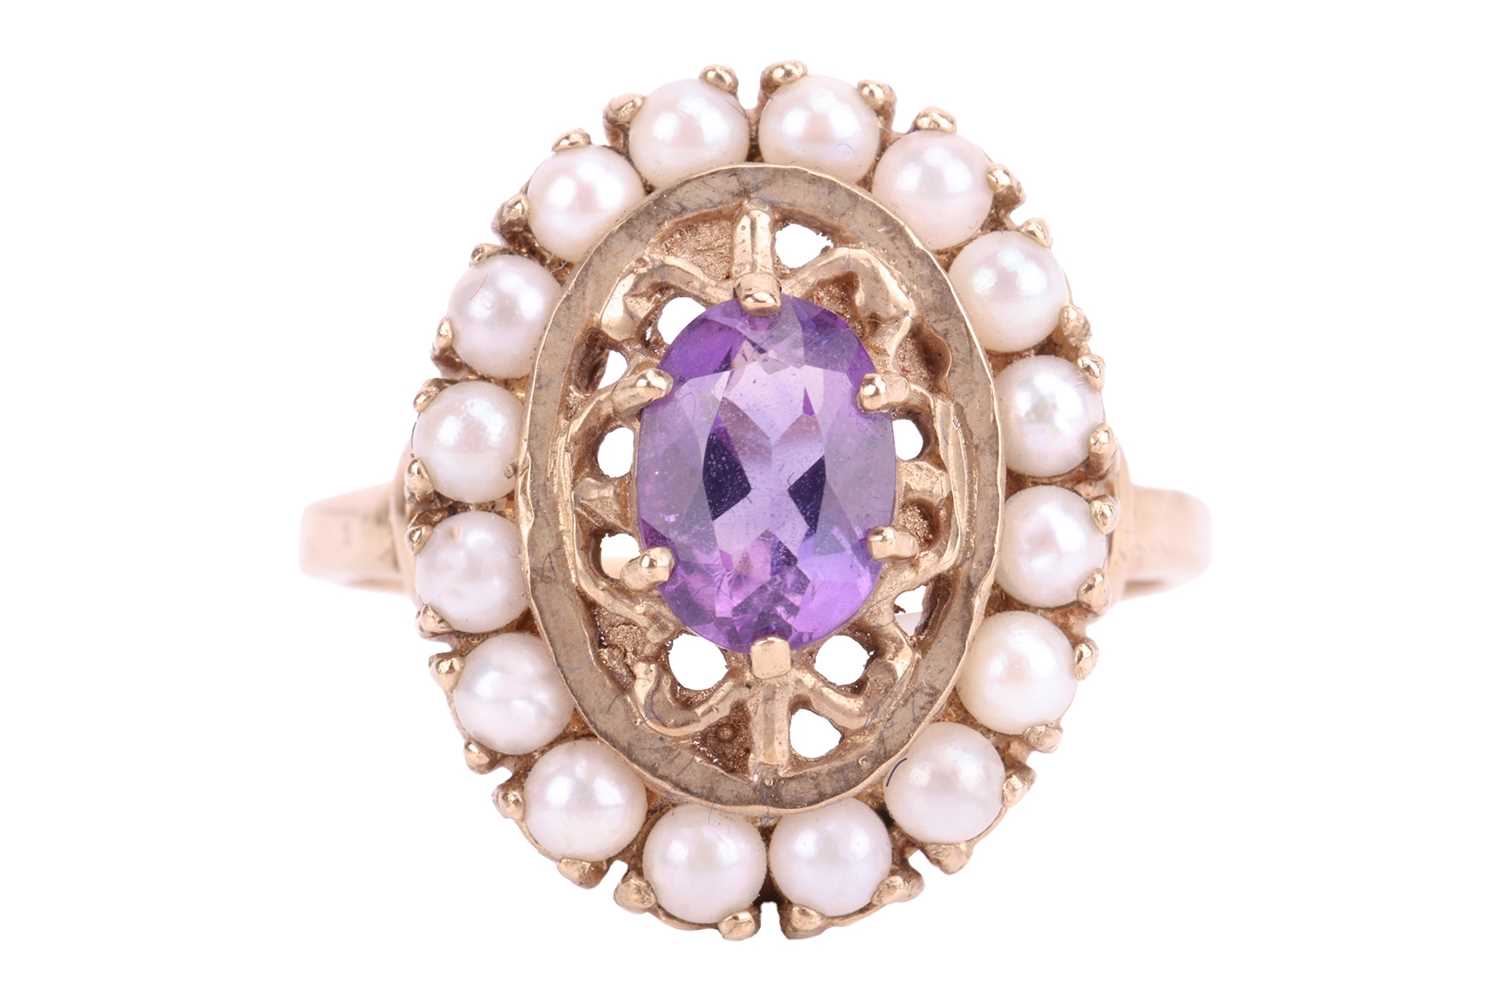 An amethyst and seed pearl cluster ring, featuring an oval cut amethyst measuring 7 x 5 x 3.5mm, in 